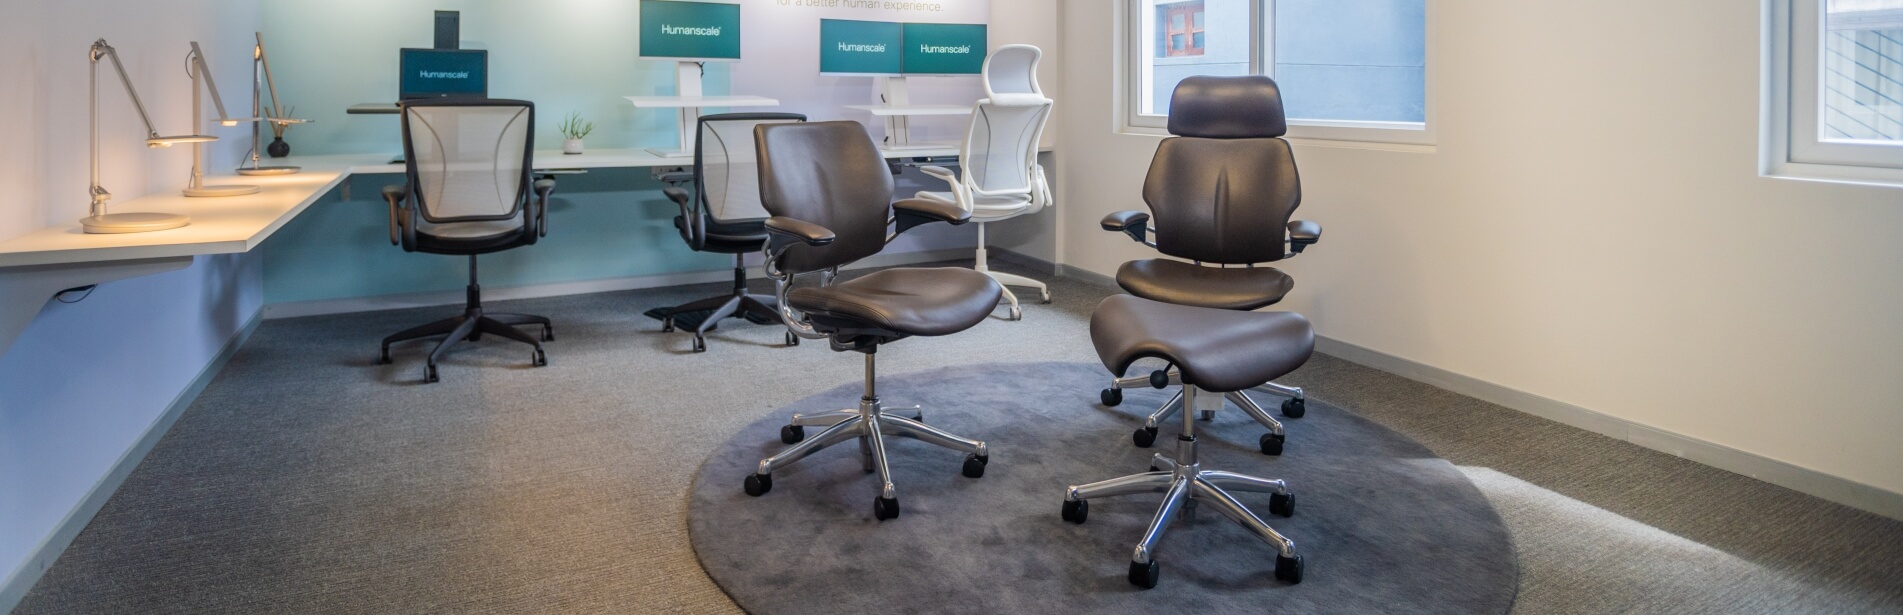 Humanscale SCube Ergonomics Office Furniture Solution About Us